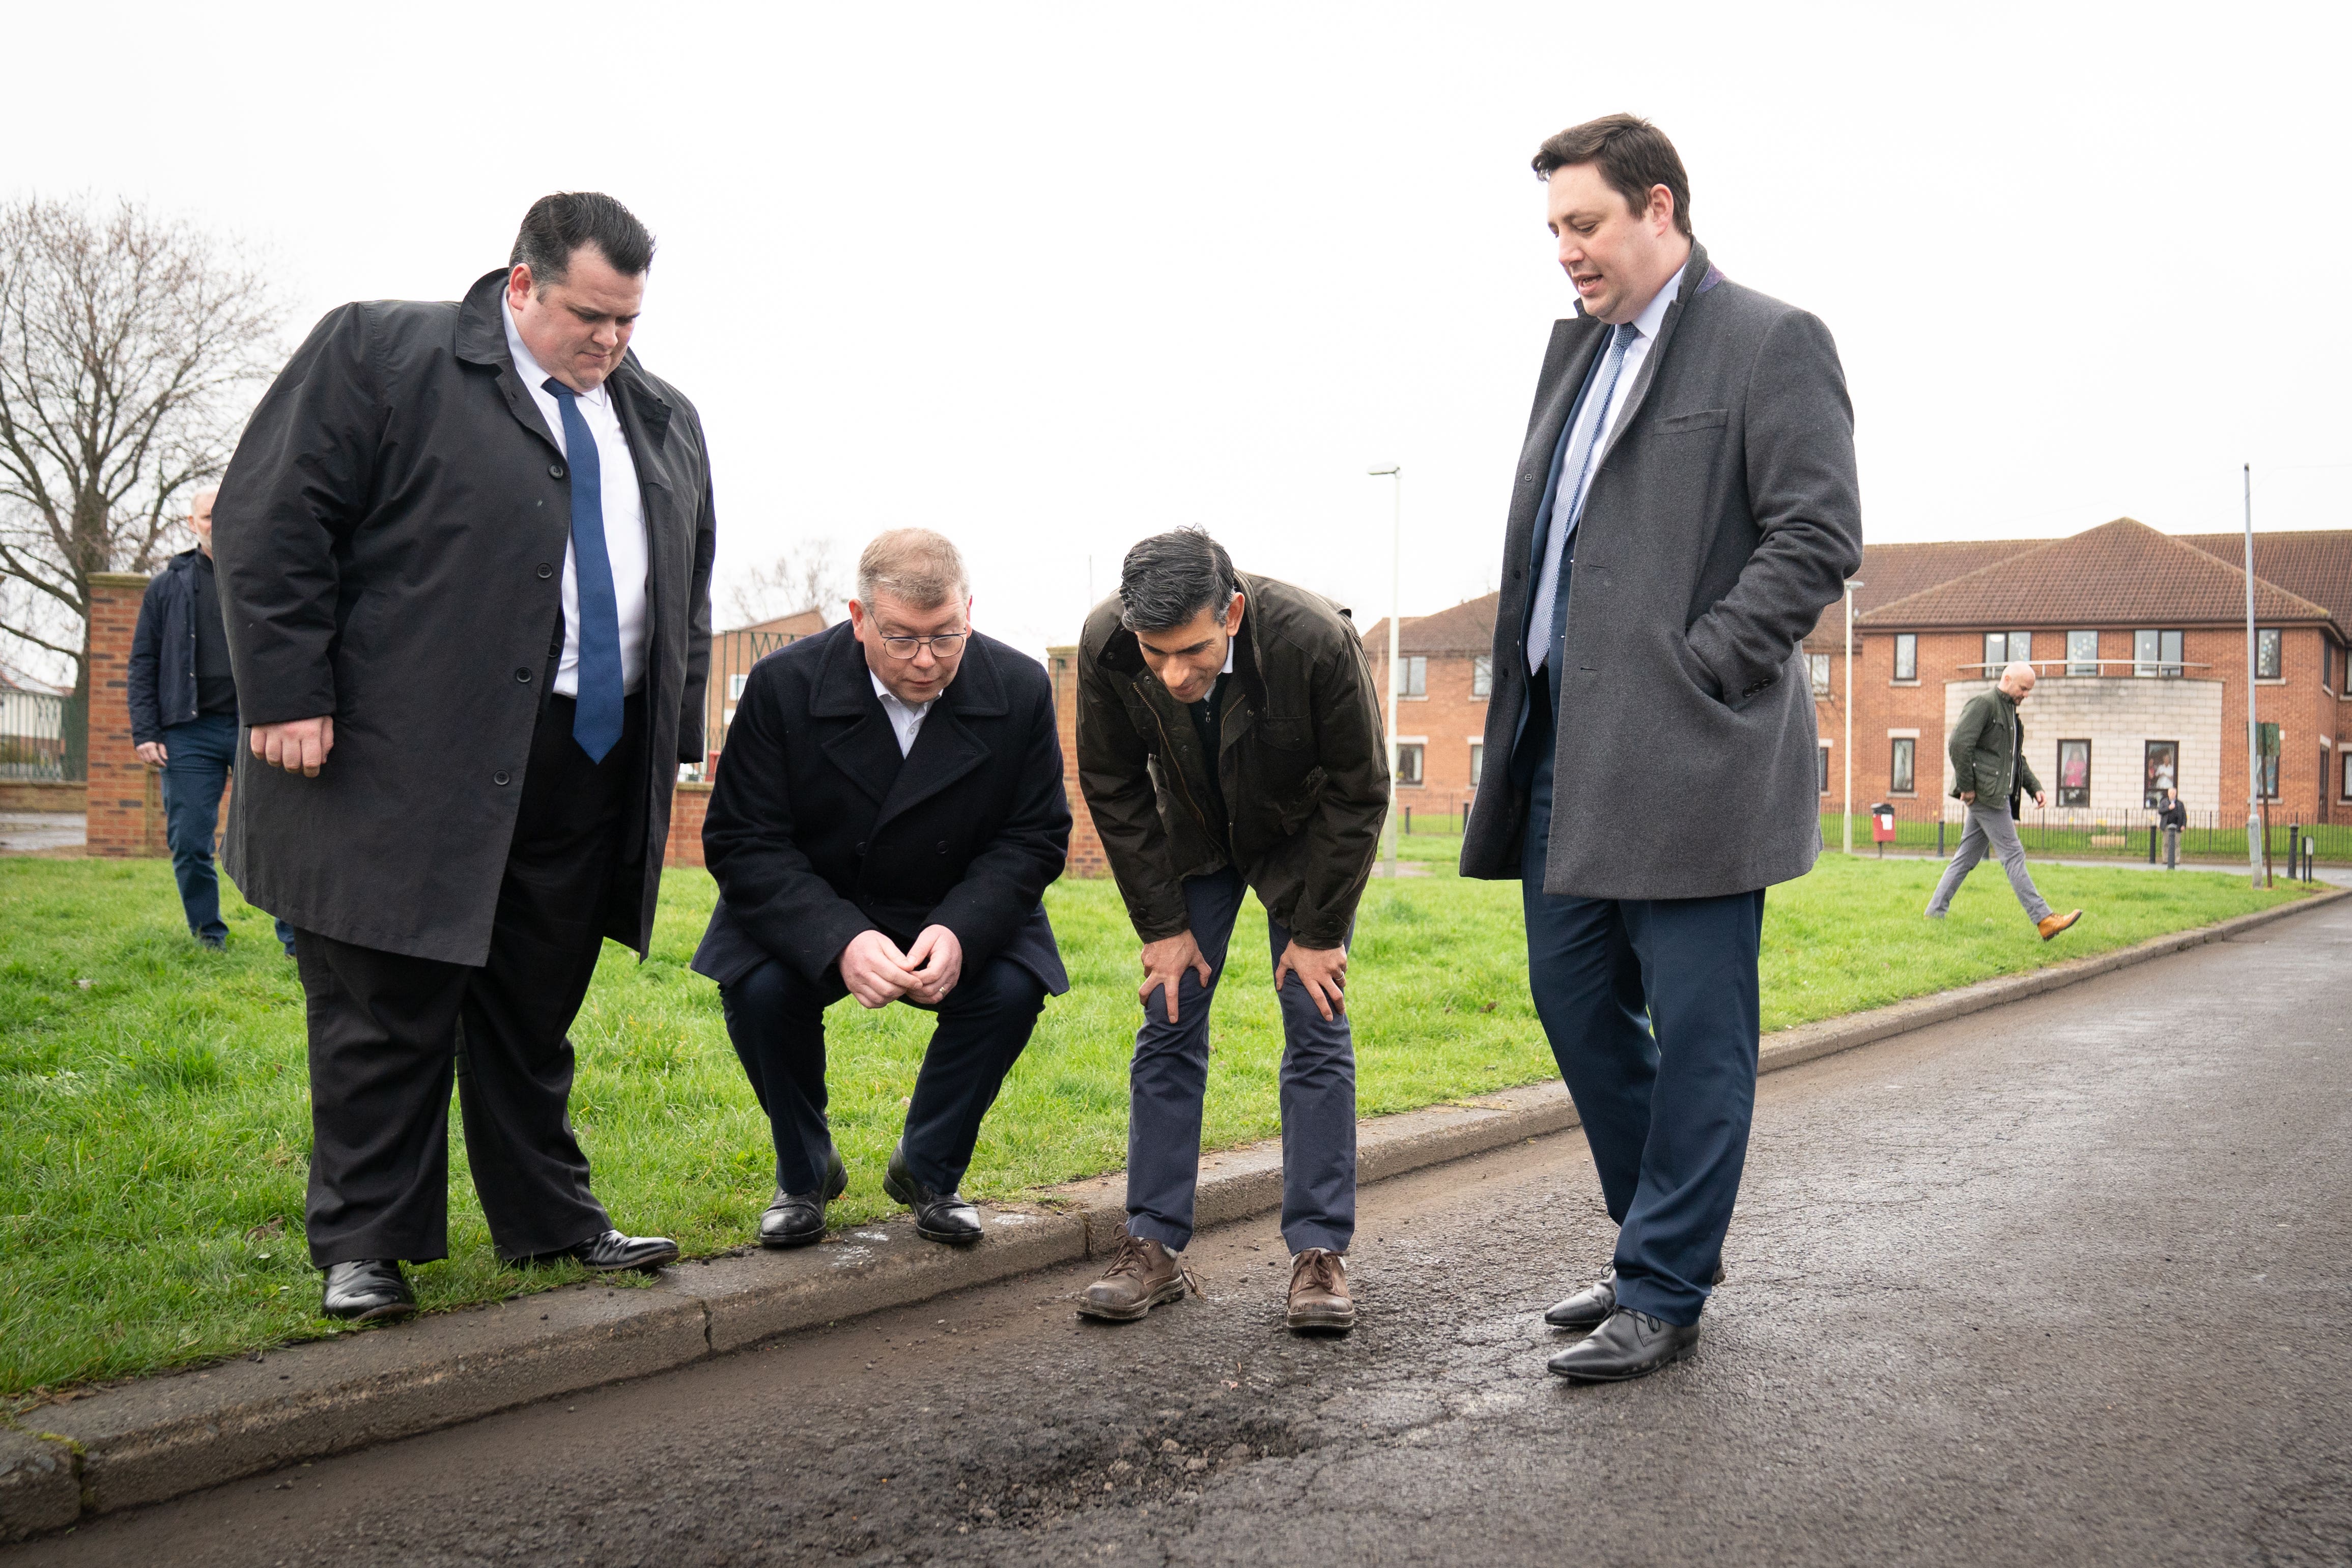 ‘Postcode lottery’ as potholes take 18 months to fix in some areas – Lib Dems